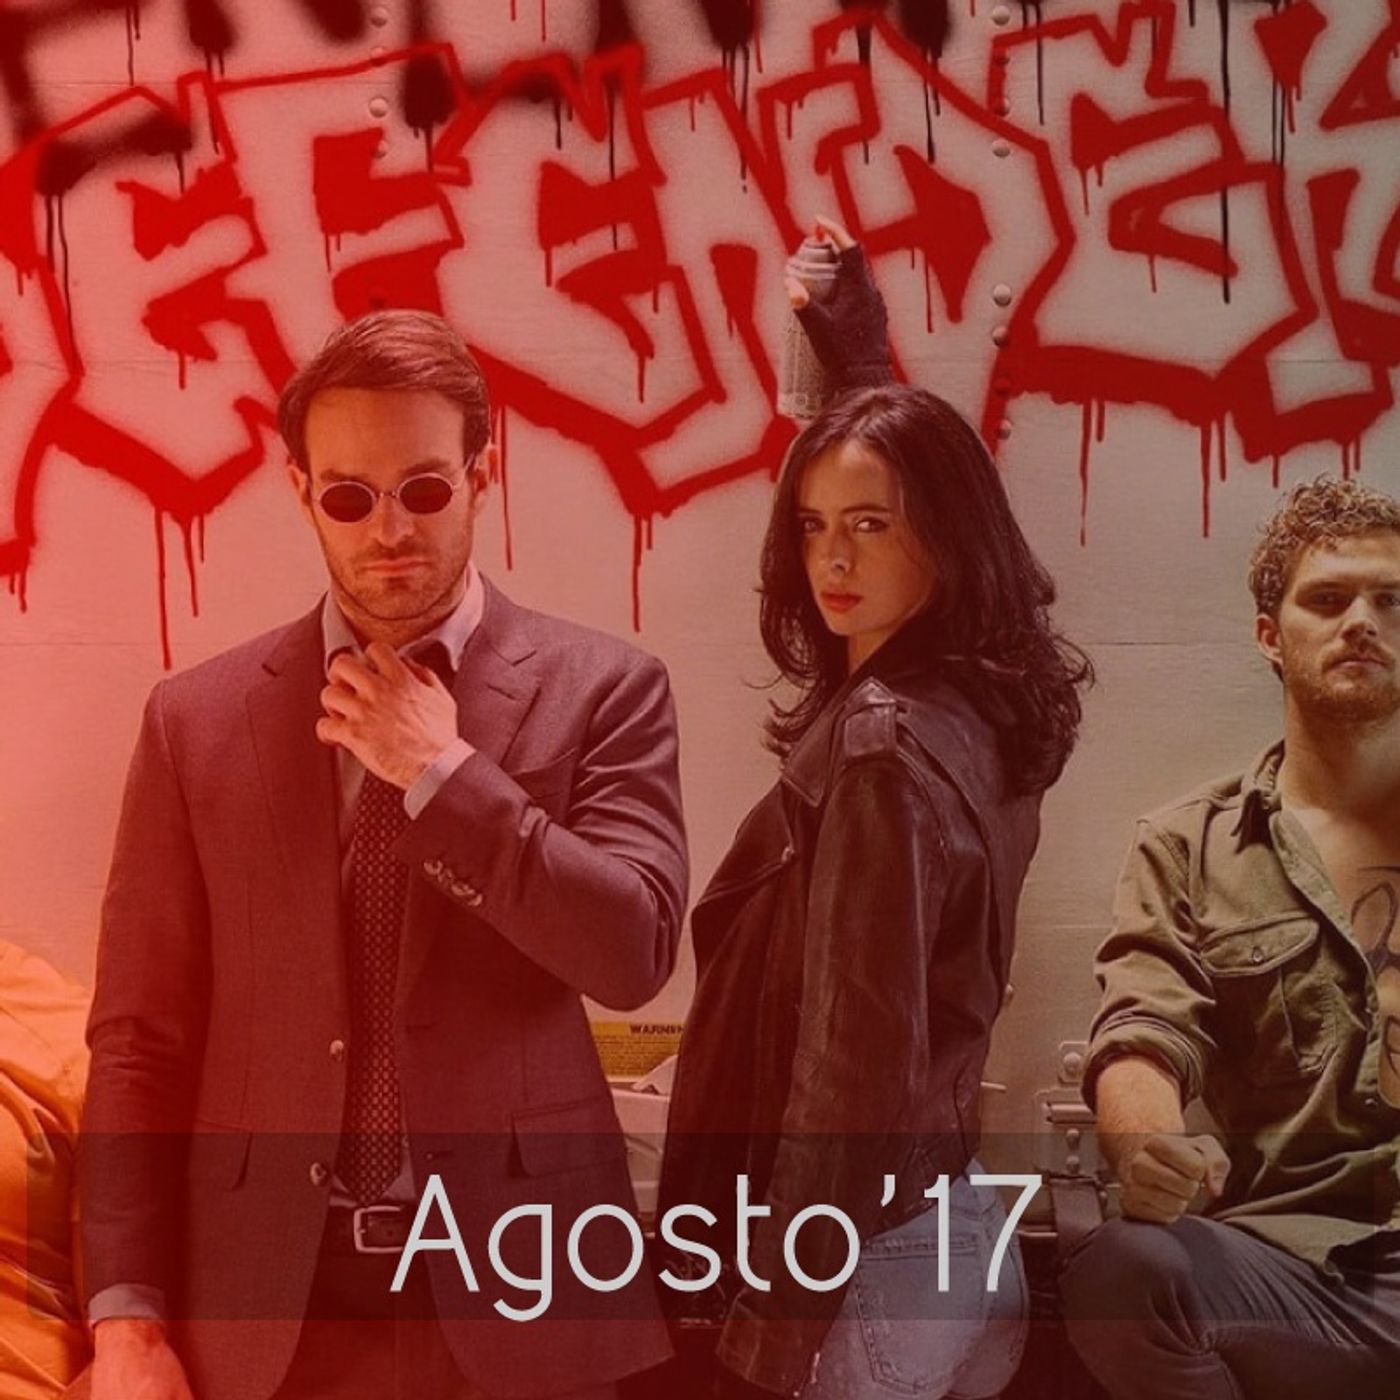 Netflixvision#Agosto'17: The Defenders, Atypical, Vikings, Death Note